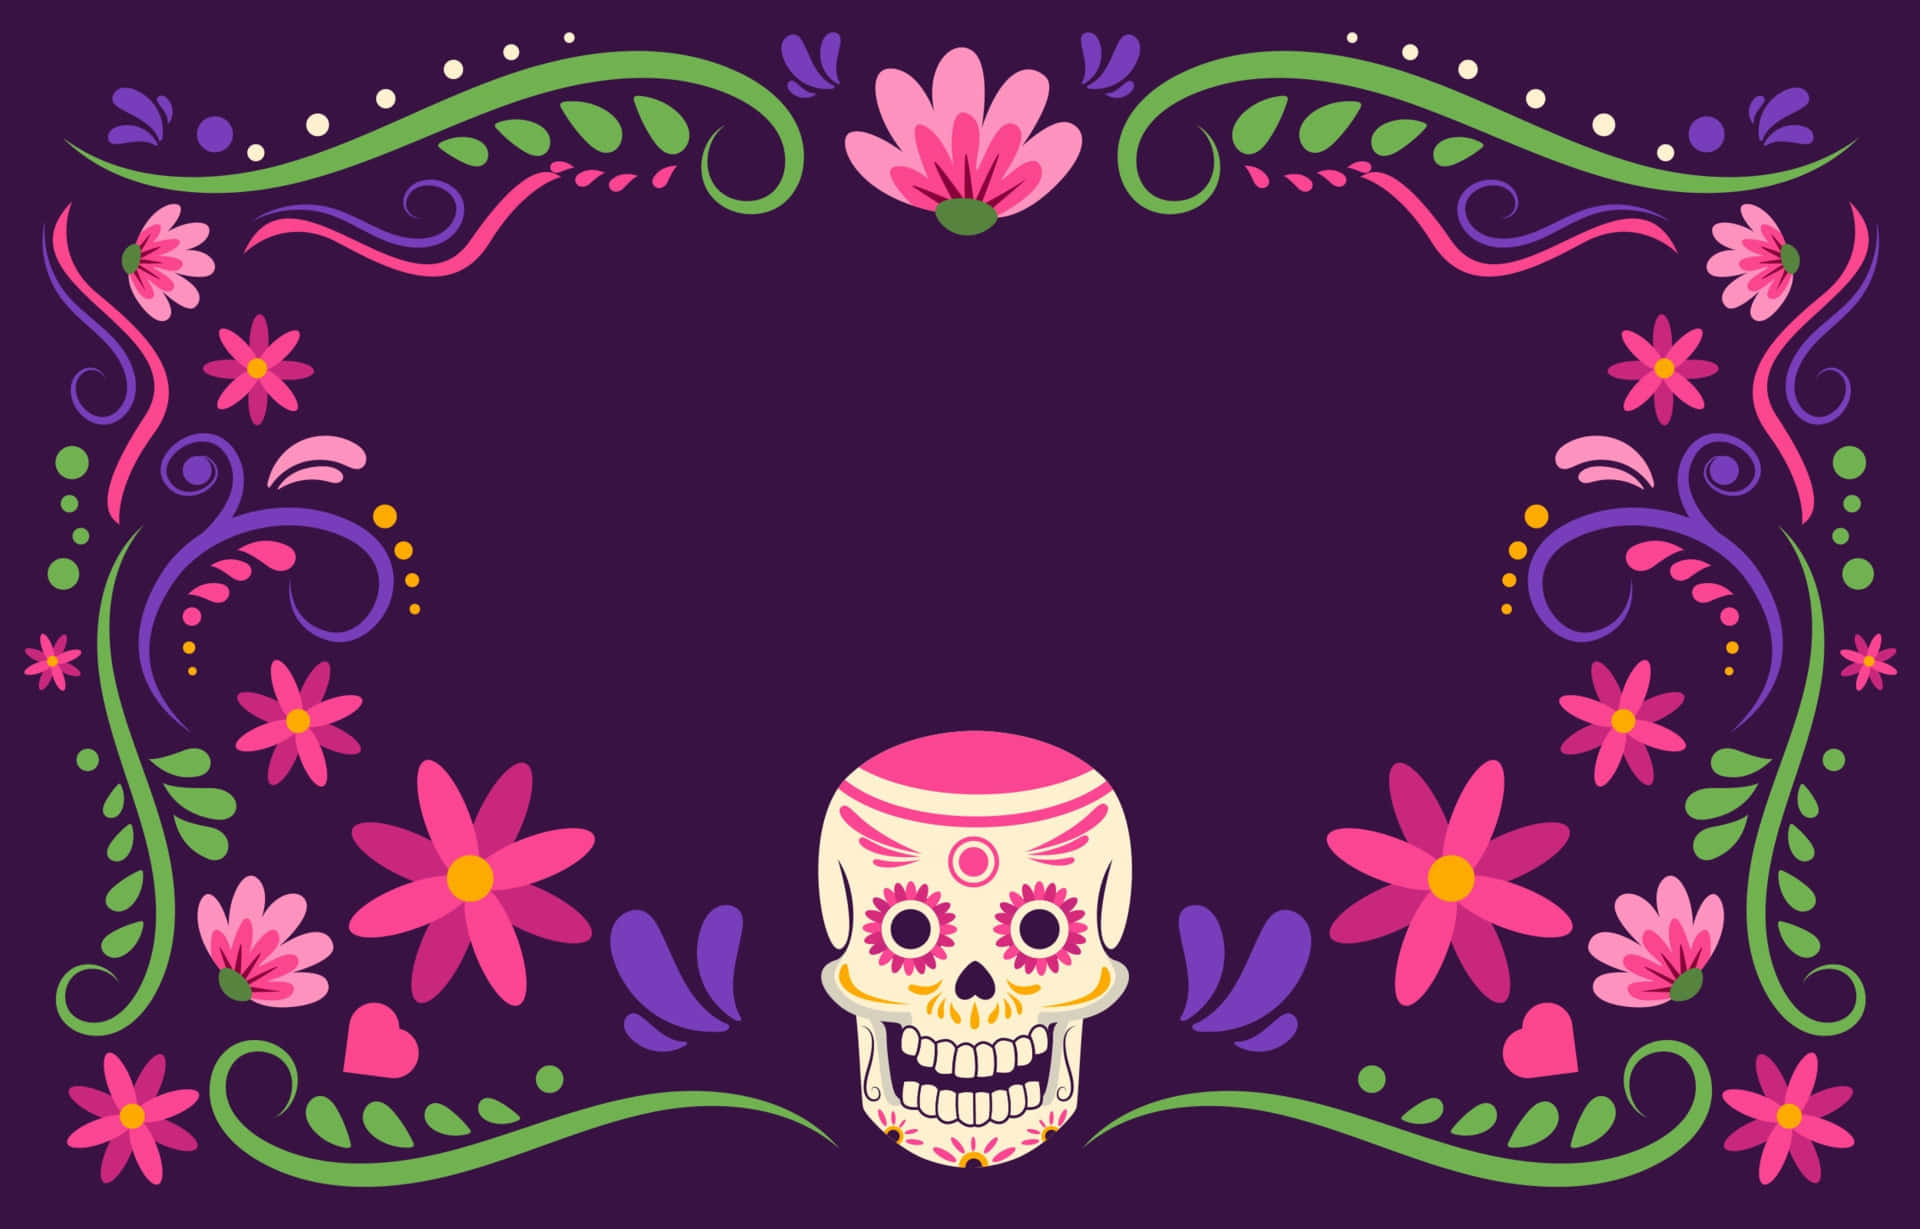 Celebrating Dia De Los Muertos with amazing Mexico-inspired costumes and decorations.